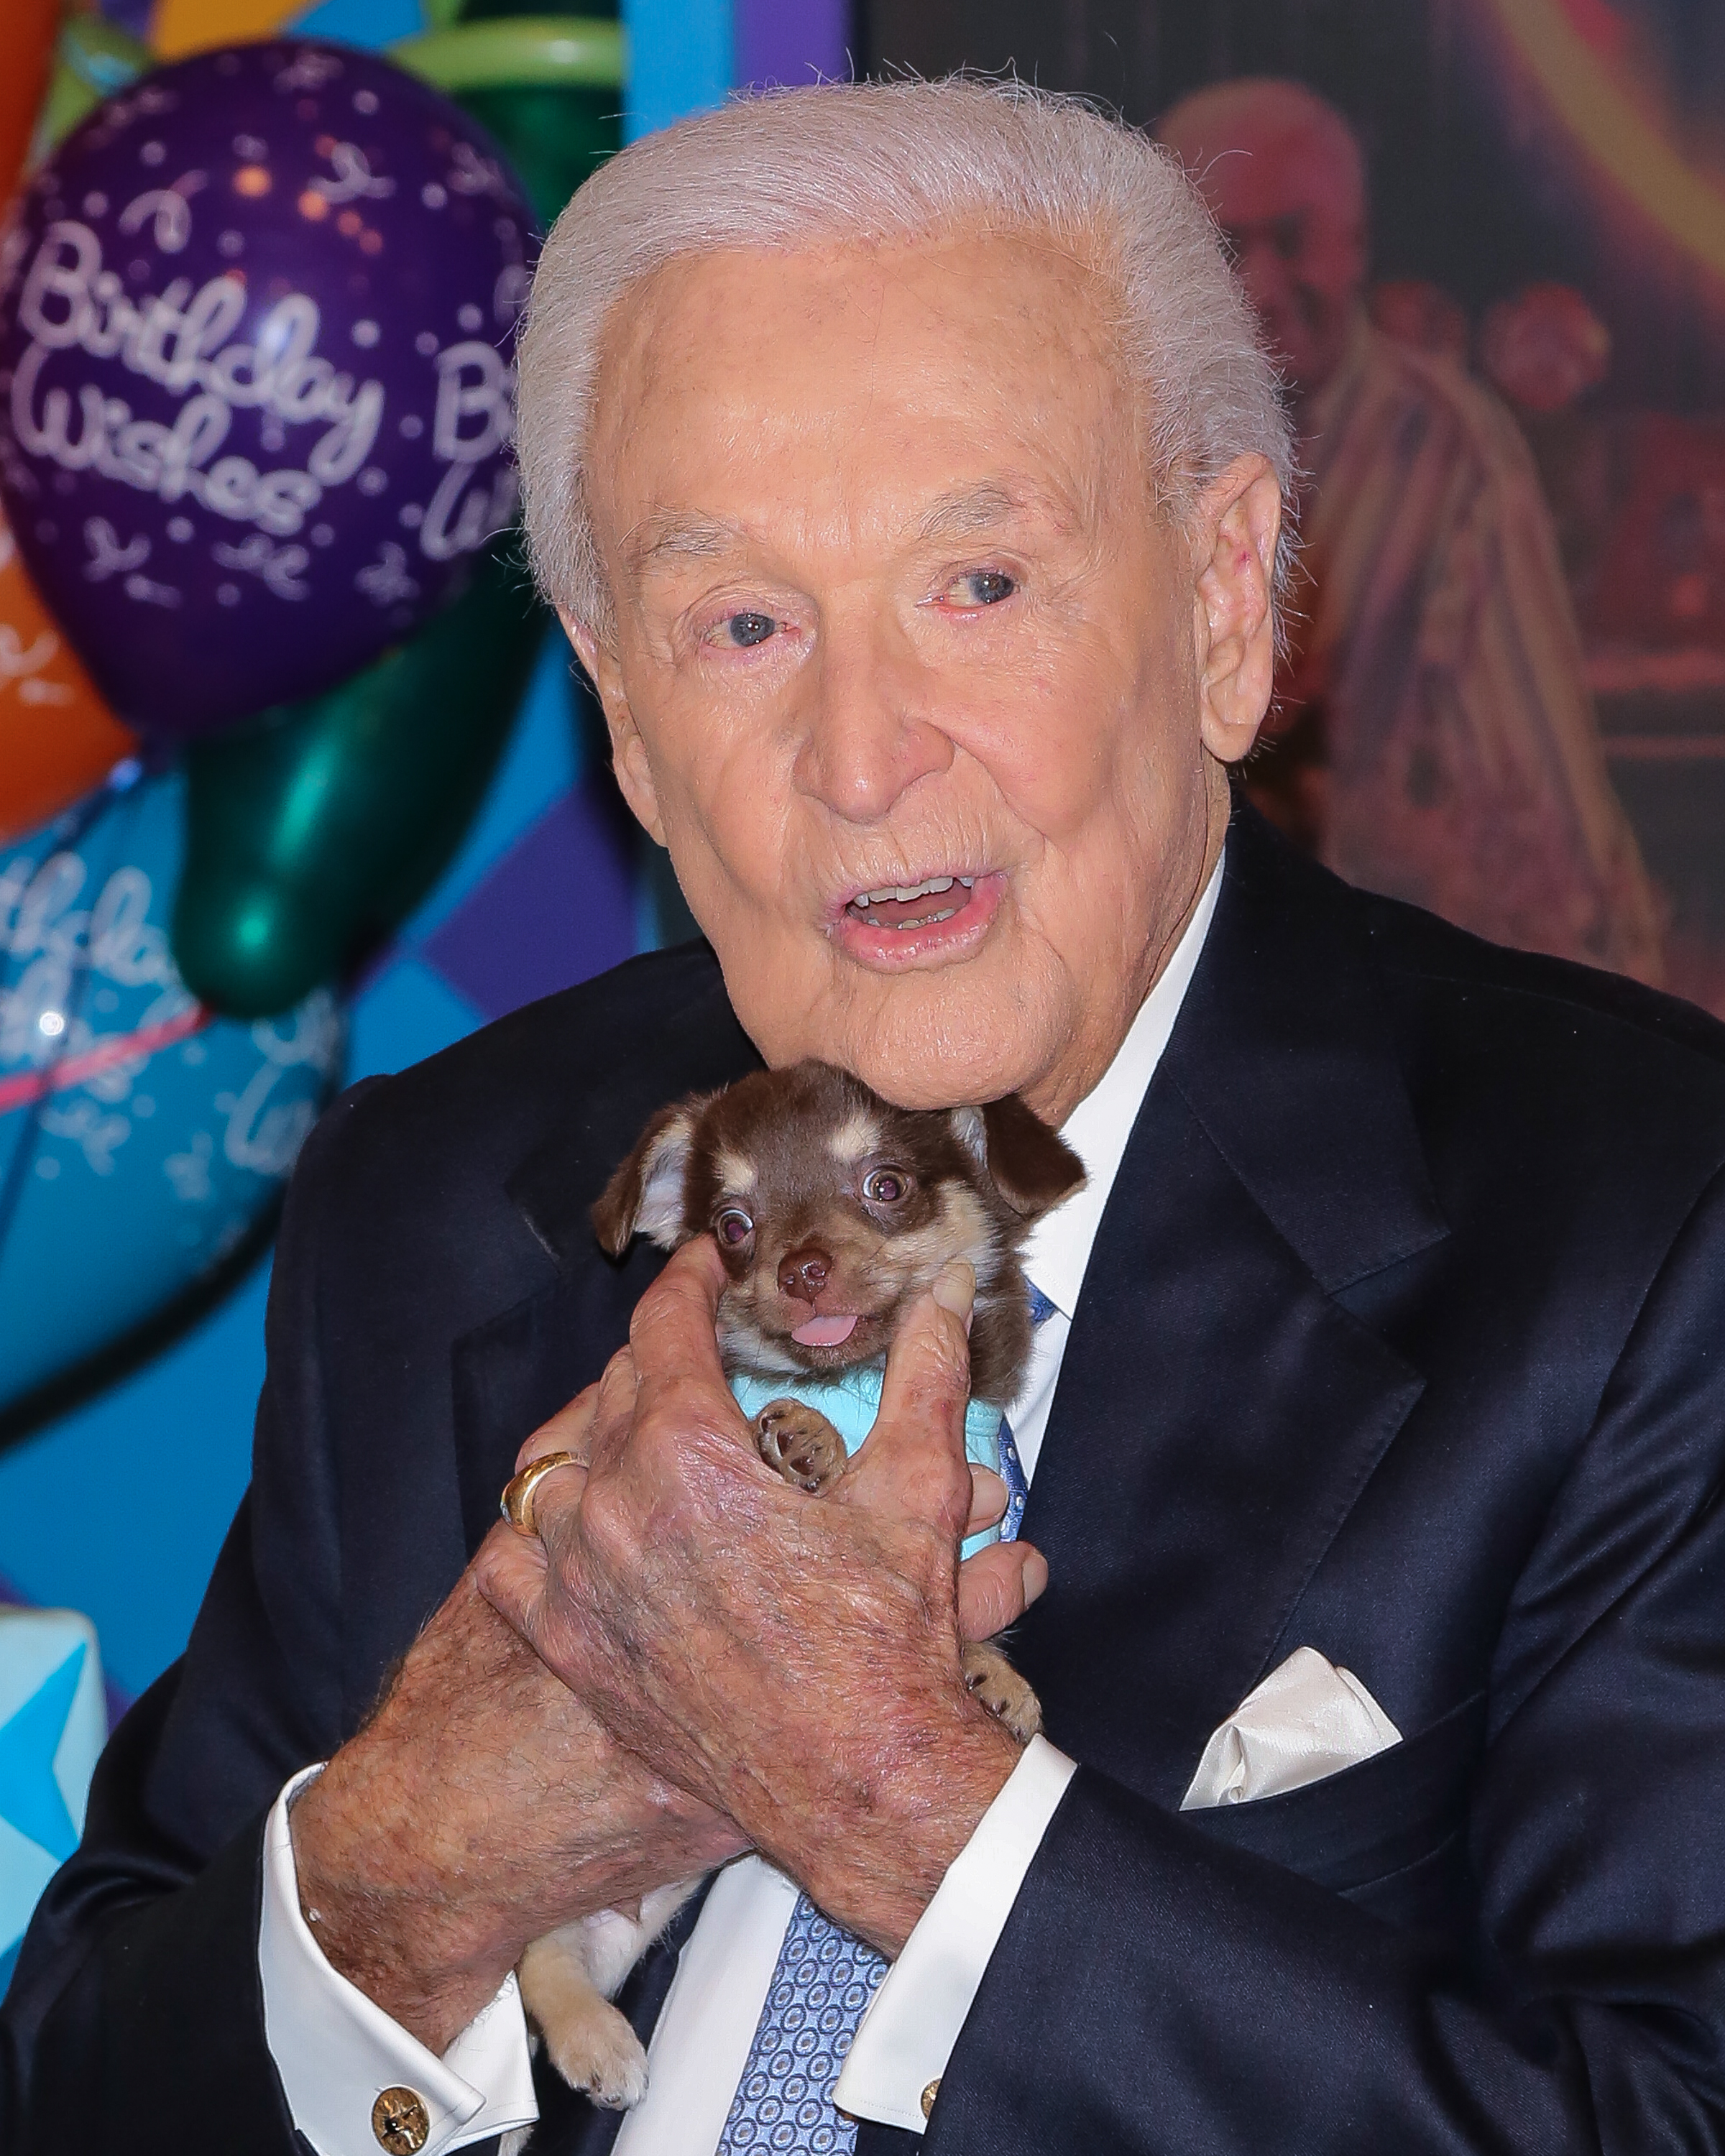 Bob Barker attends the set of "The Price Is Right" to celebrate his 90th Birthday at CBS Television City on November 5, 2013 in Los Angeles, California. | Source: Getty Images